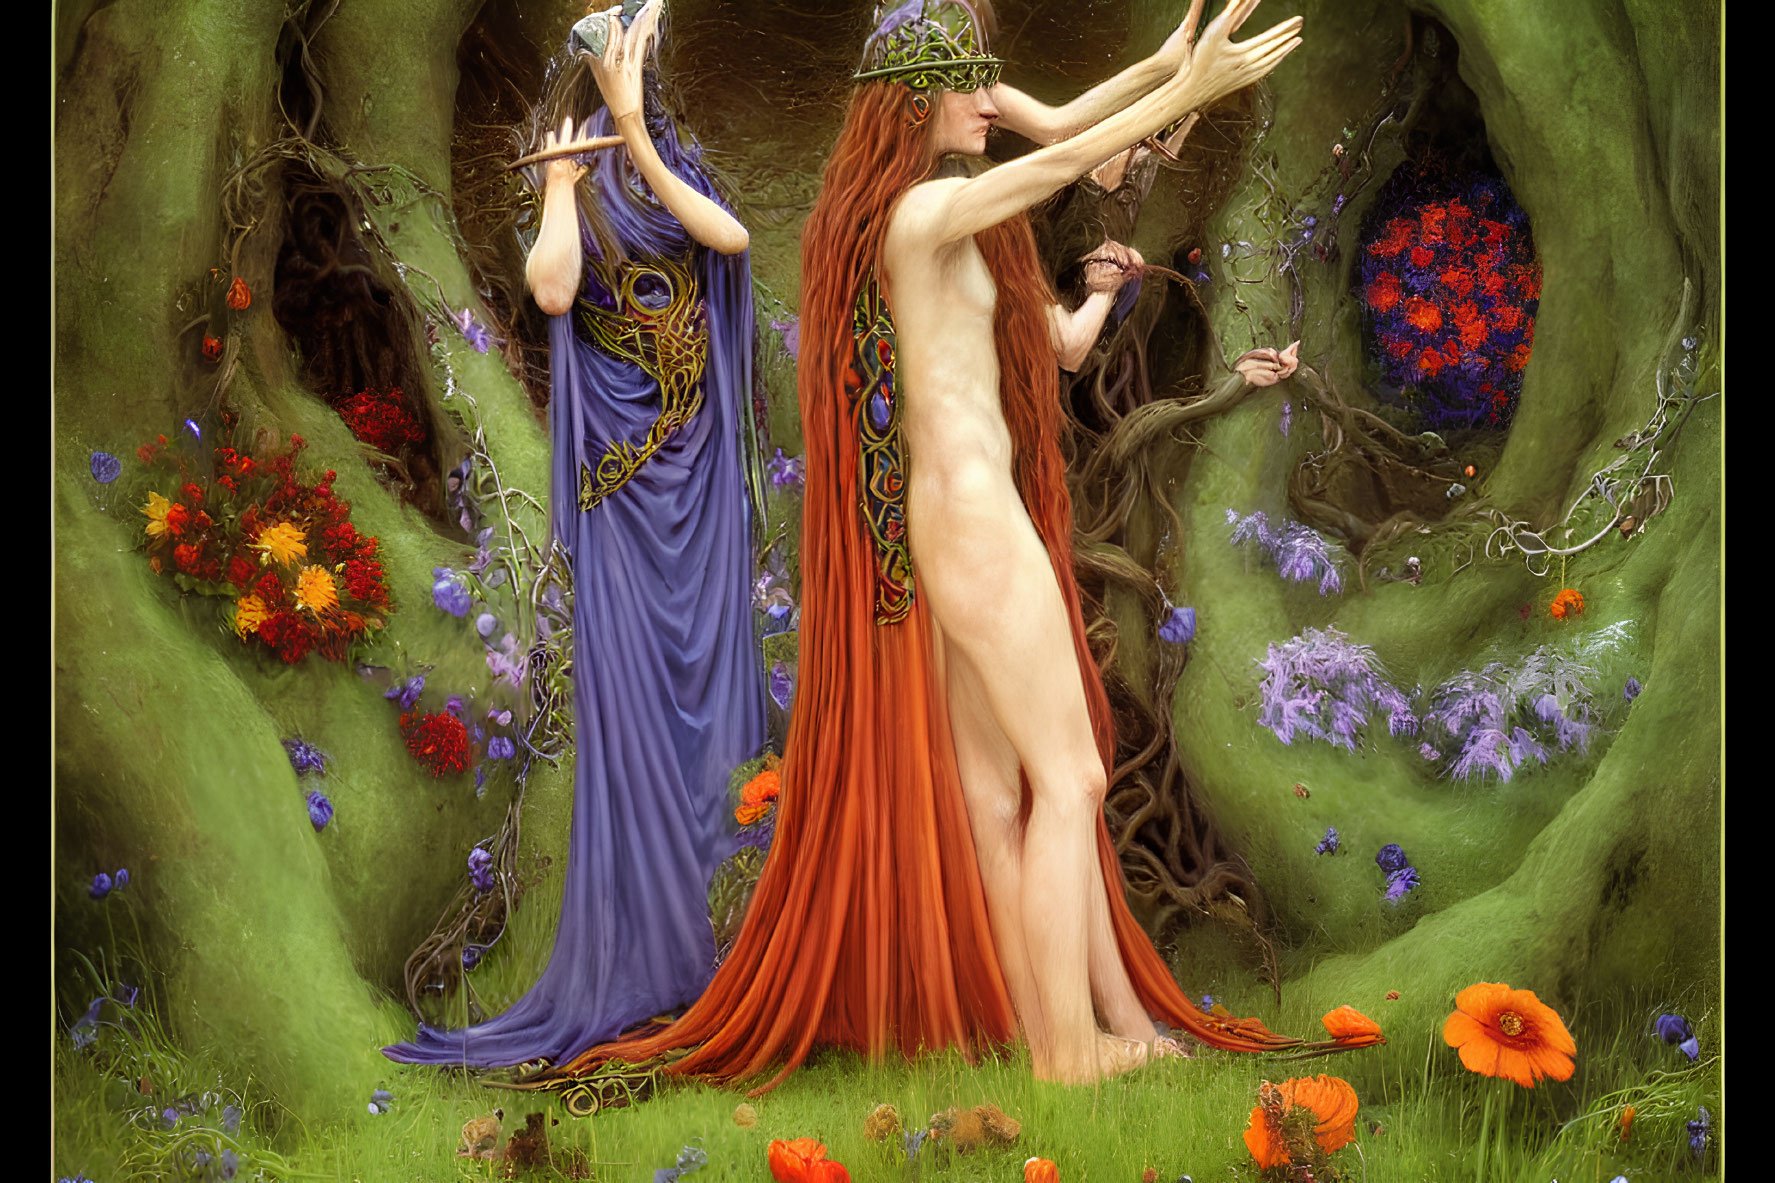 Ethereal women in enchanted forest with vibrant flowers